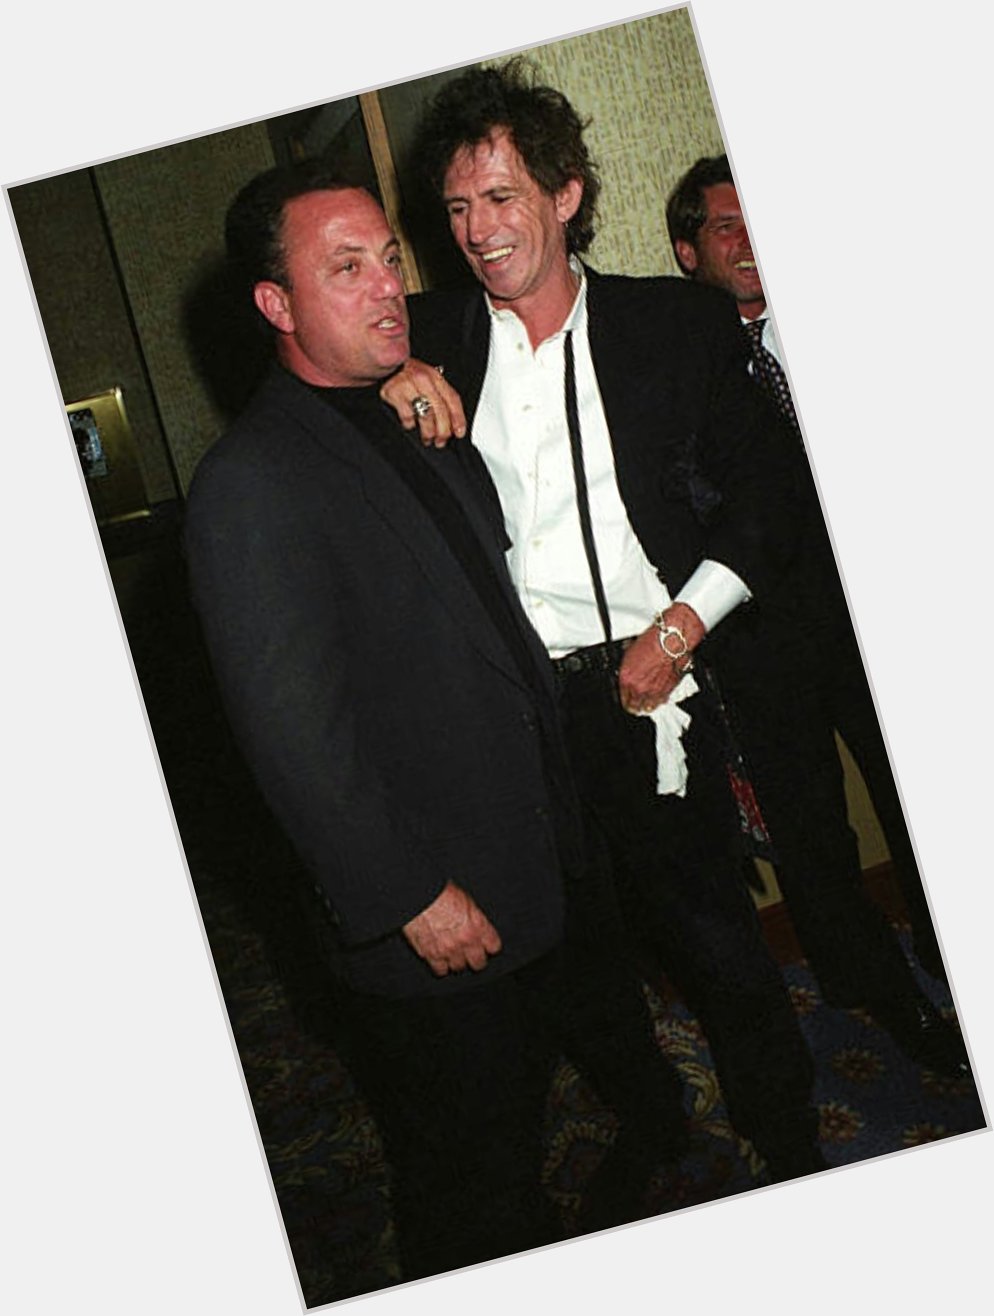 He is one of the favourite musicians.
Happy birthday Billy Joel!
Billy & Keith at R&R Hall of Fame, 1993. 